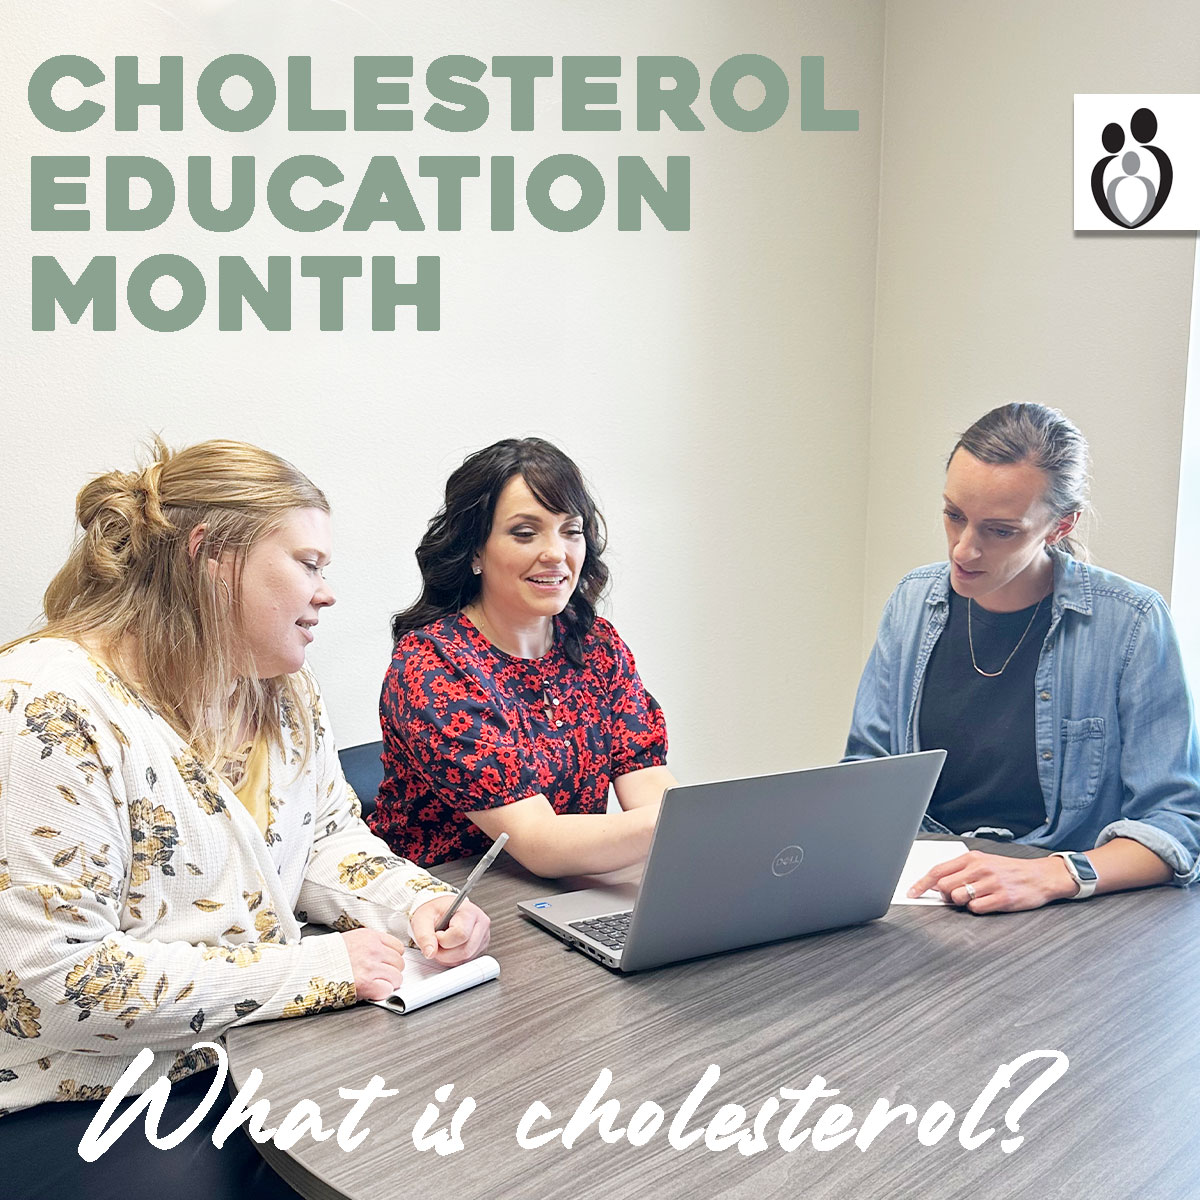 Cholesterol Education Month, Population Health Team | Promise Community Health Center in Sioux Center, Iowa | Federally Qualified Health Center serving northwest Iowa | Promise offers medical care, prenatal care, behavioral healthcare, population health care, health coaching as well as dental and vision care.